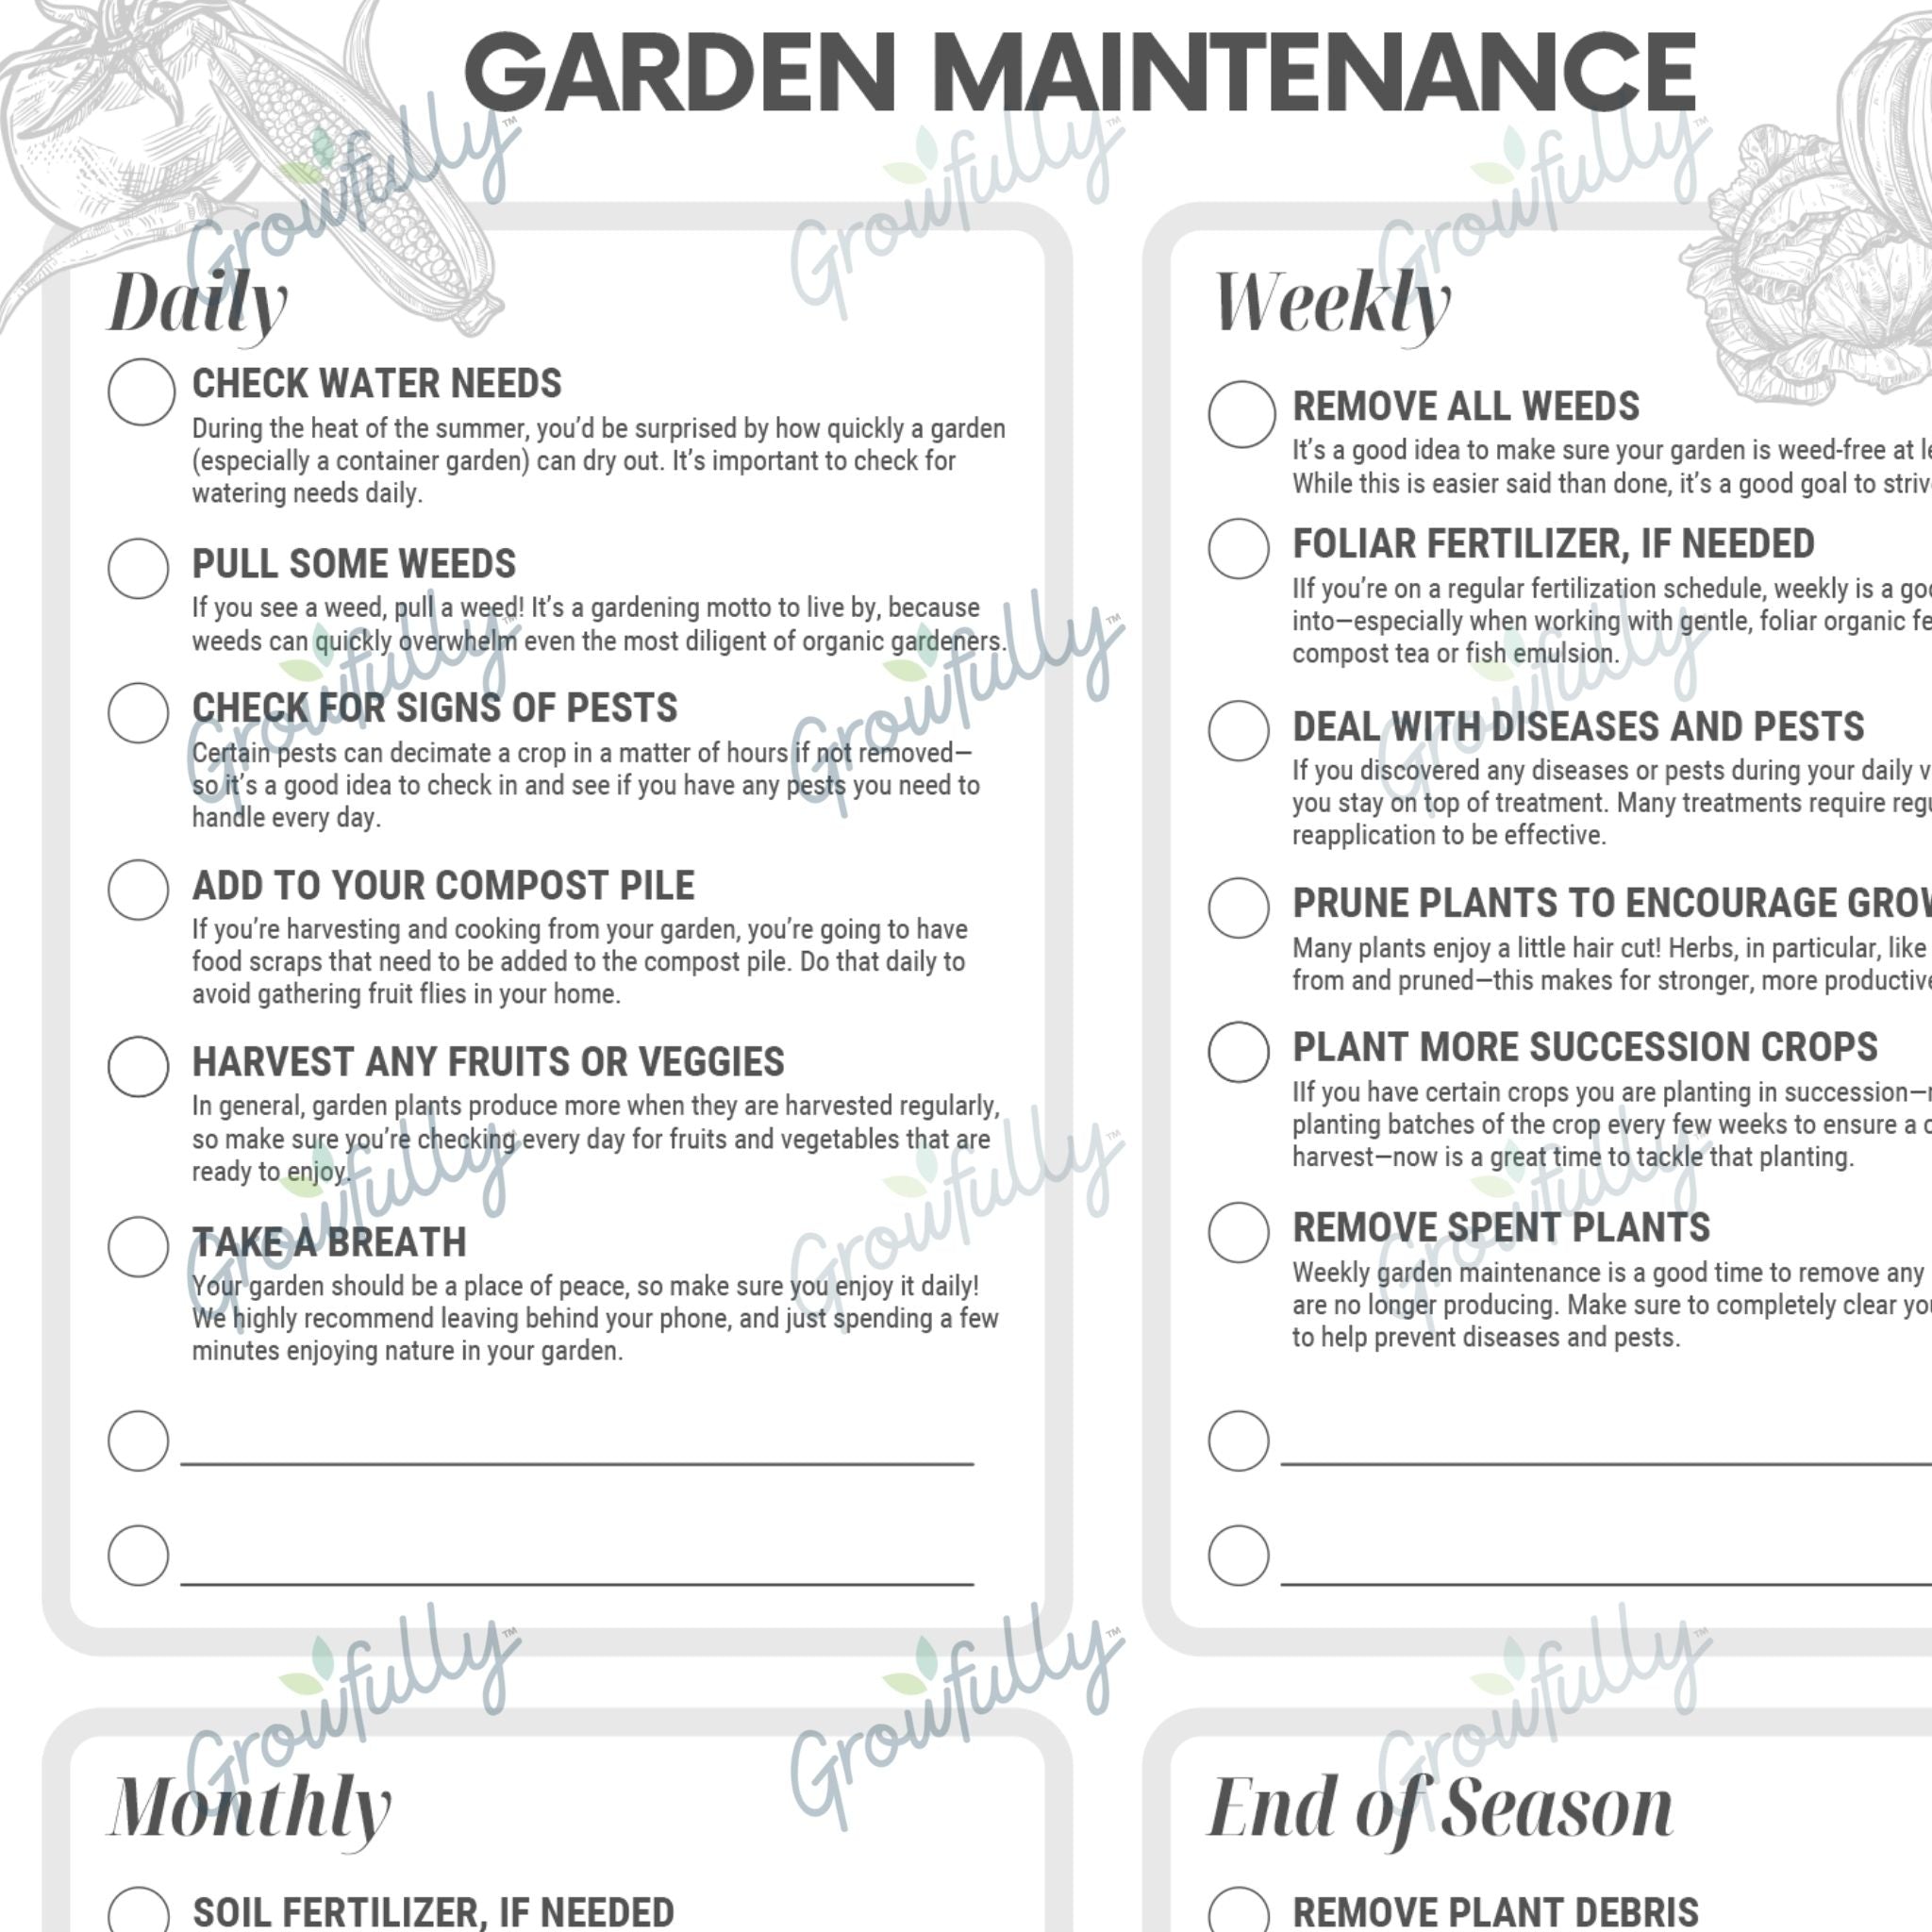 Close up showing the daily and weekly portions of the Garden Maintenance printable checklist.